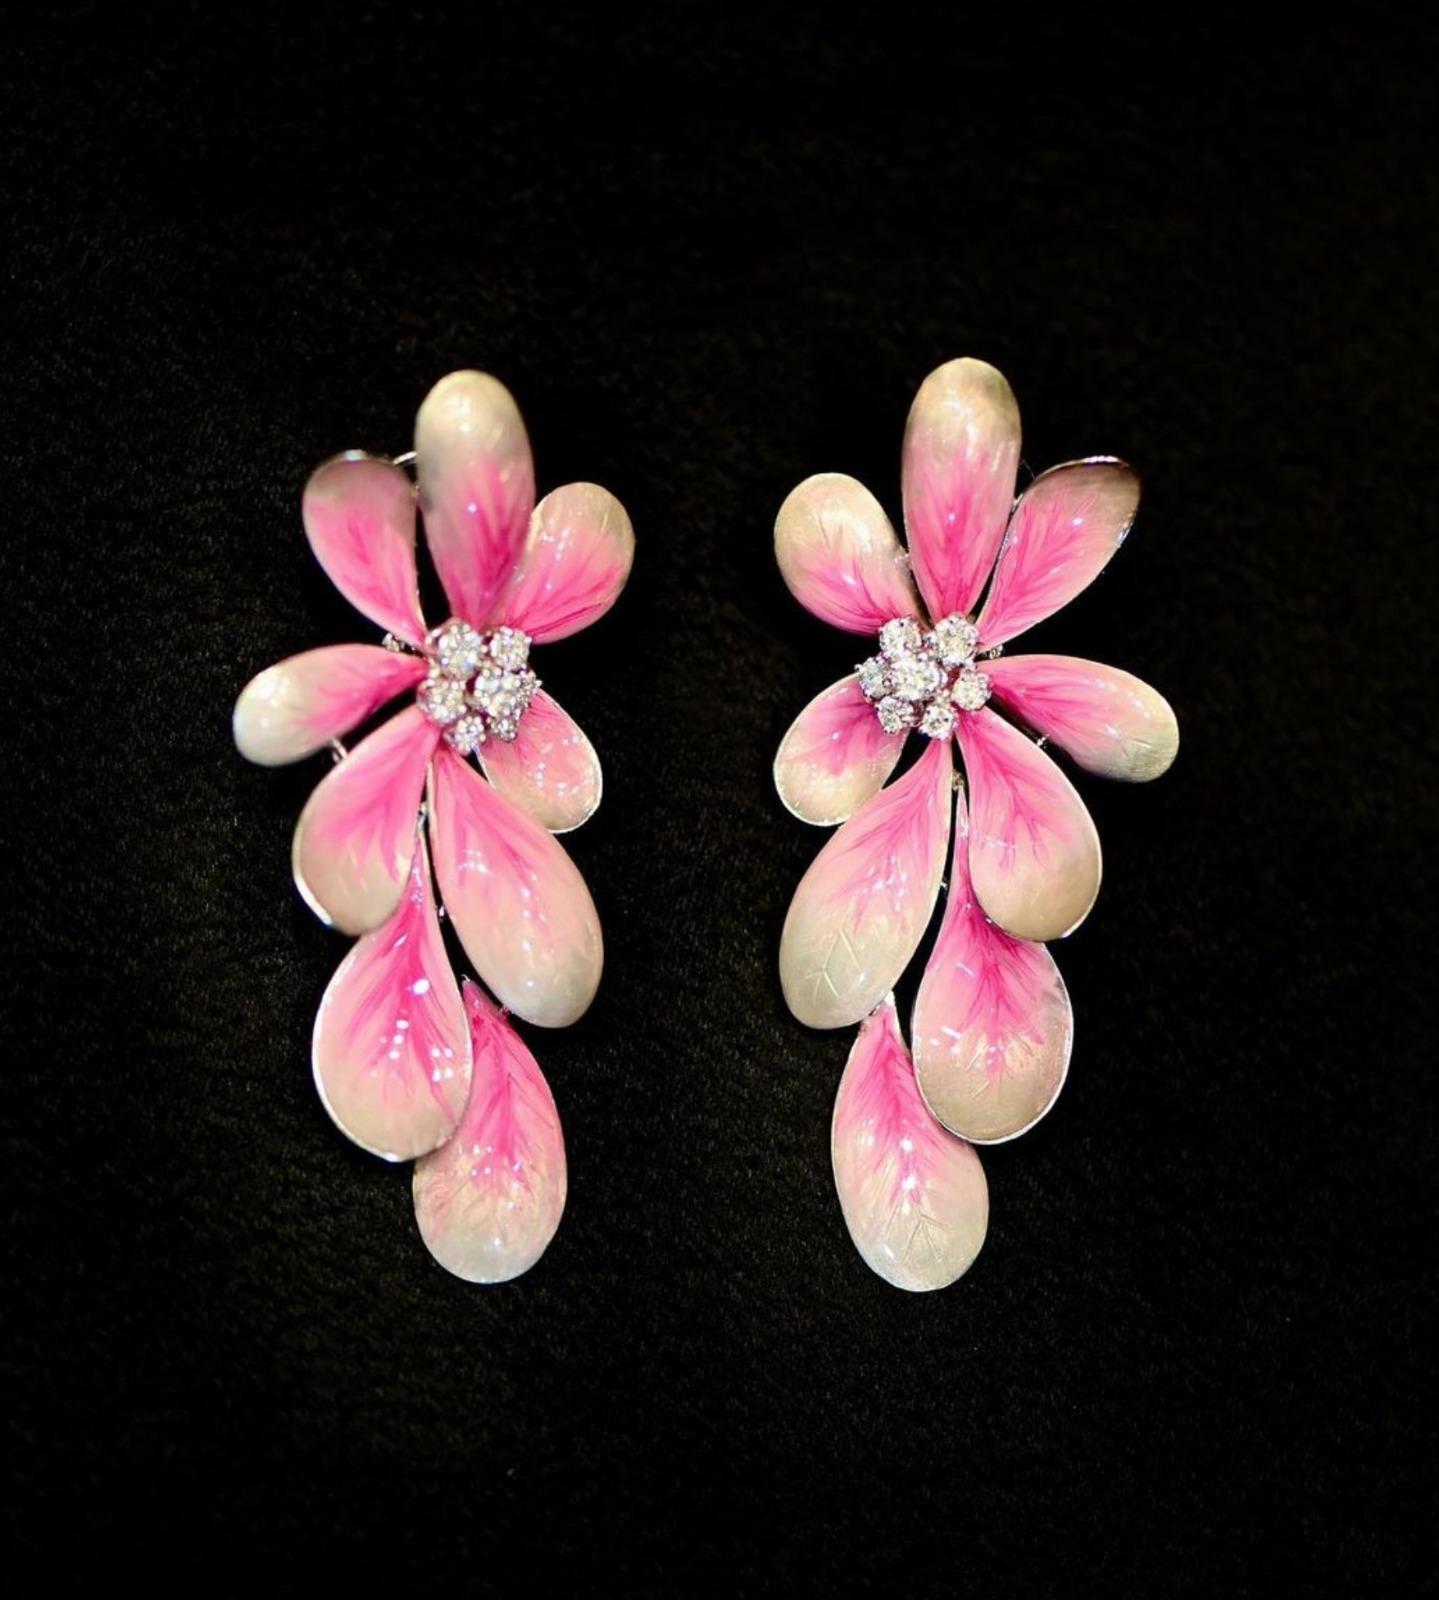 Introducing the charming DAISY FLOWER PINK EARRINGS, a delightful addition to any jewelry collection. Crafted with white gold, these earrings feature enchanting daisy flower motifs adorned with round brilliant cut diamonds, delicately set amidst